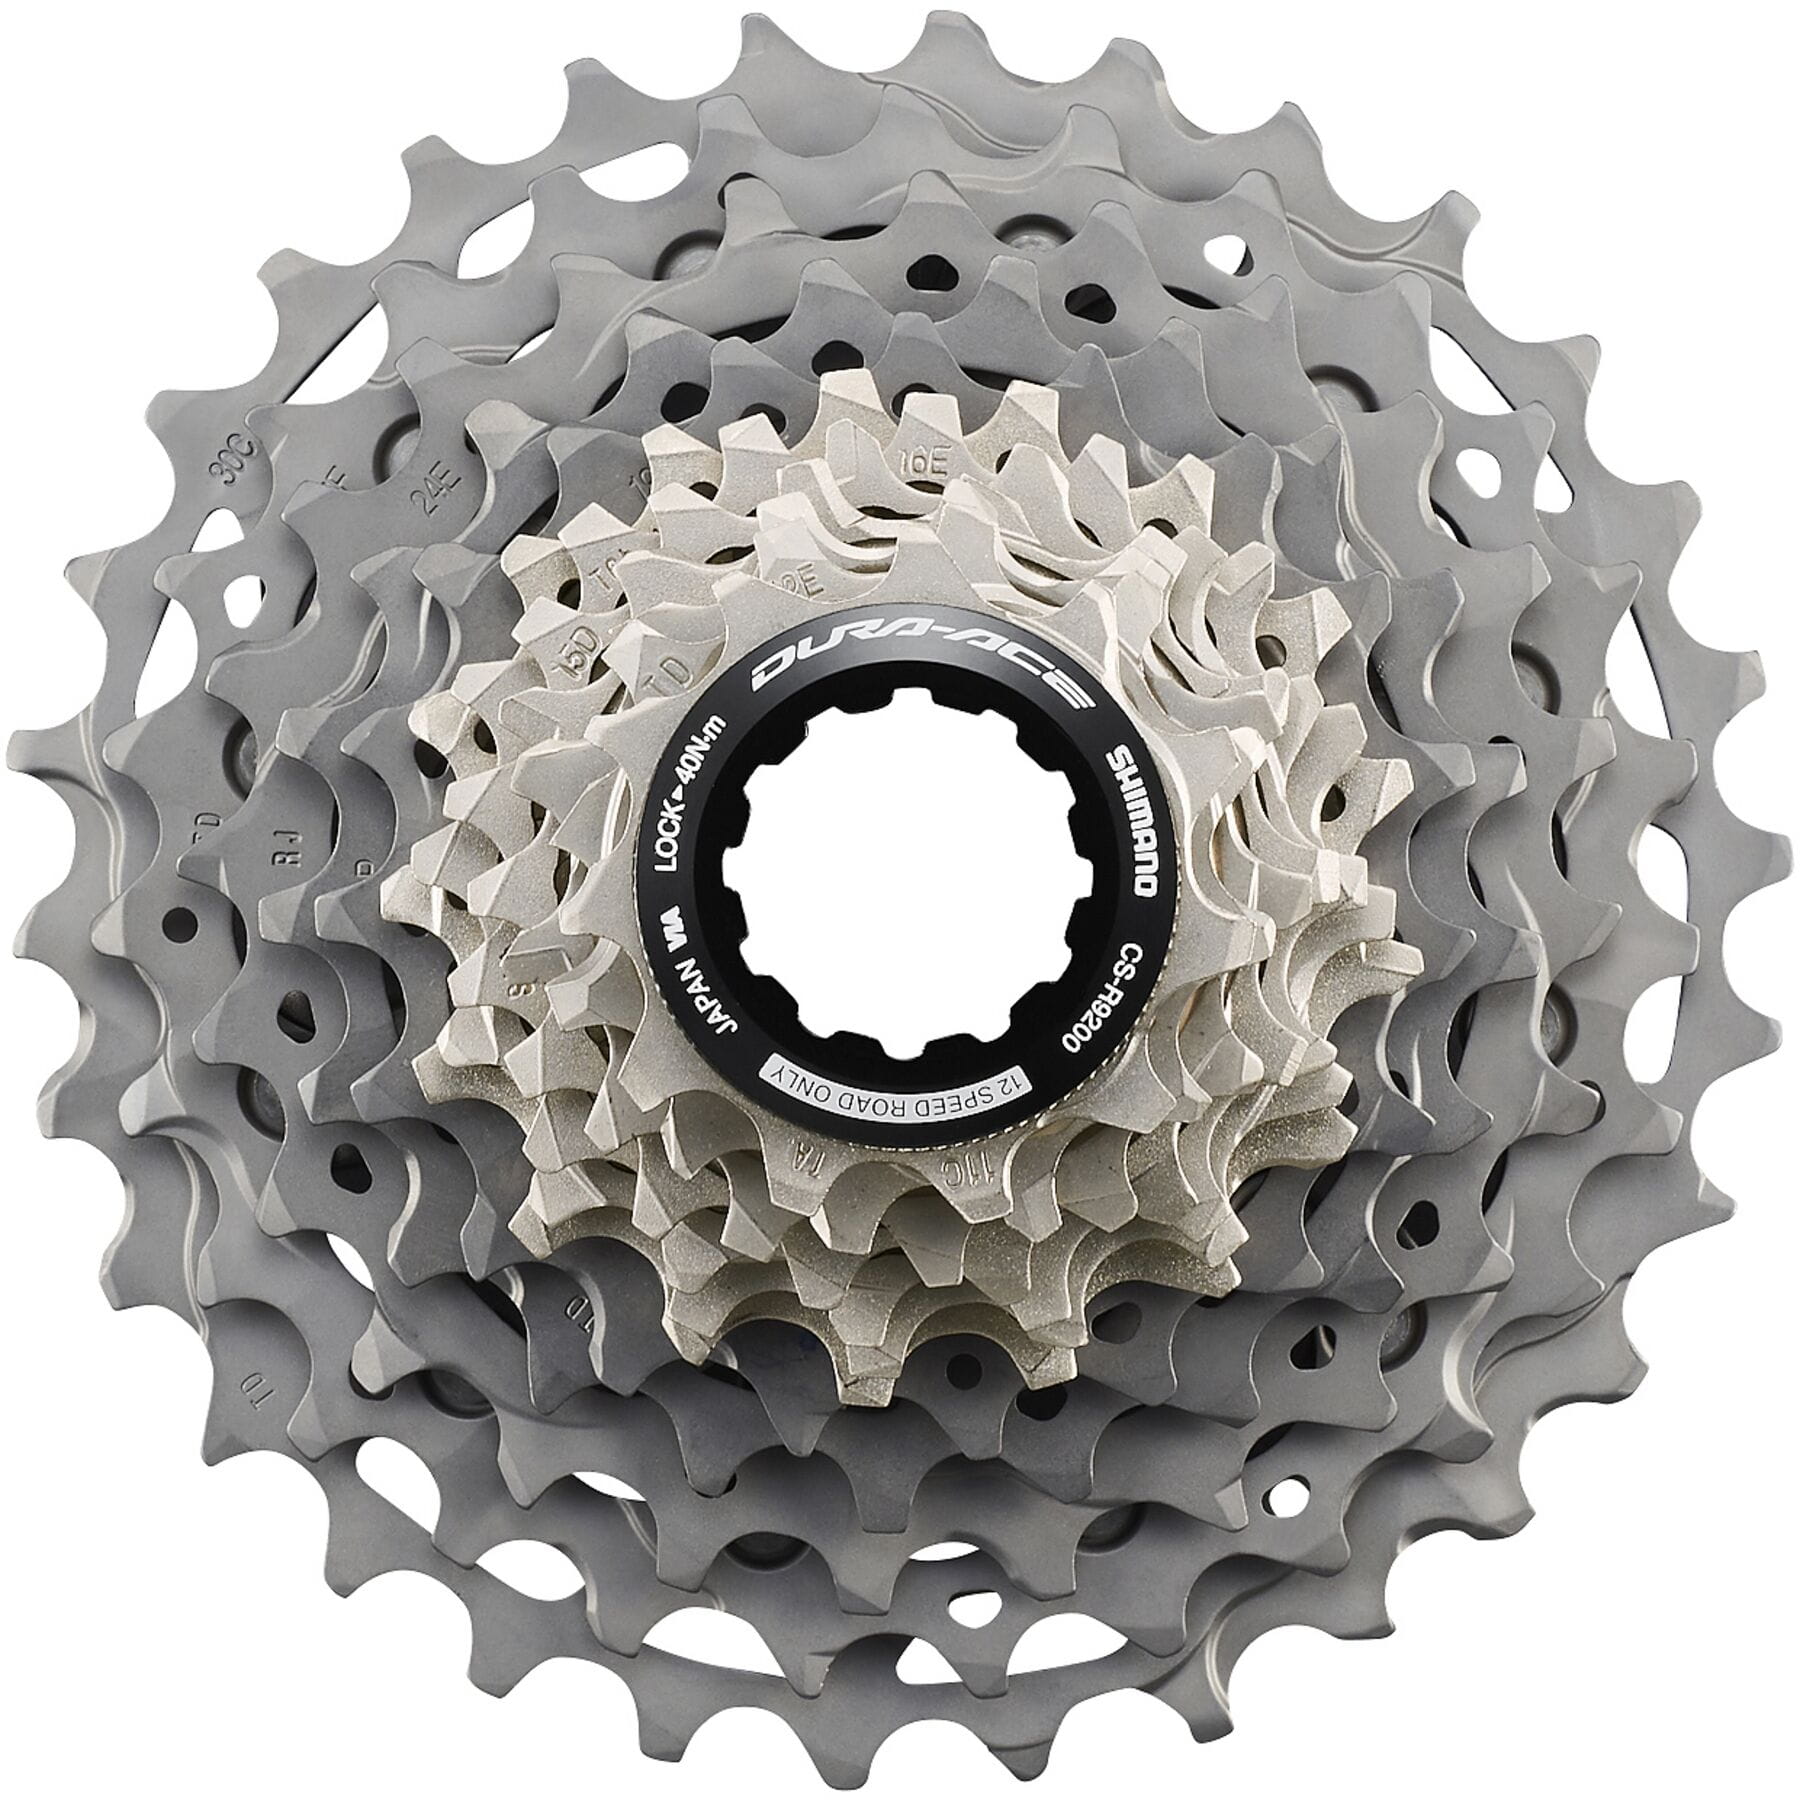 Shimano R9200 Dura Ace 12 speed cassette